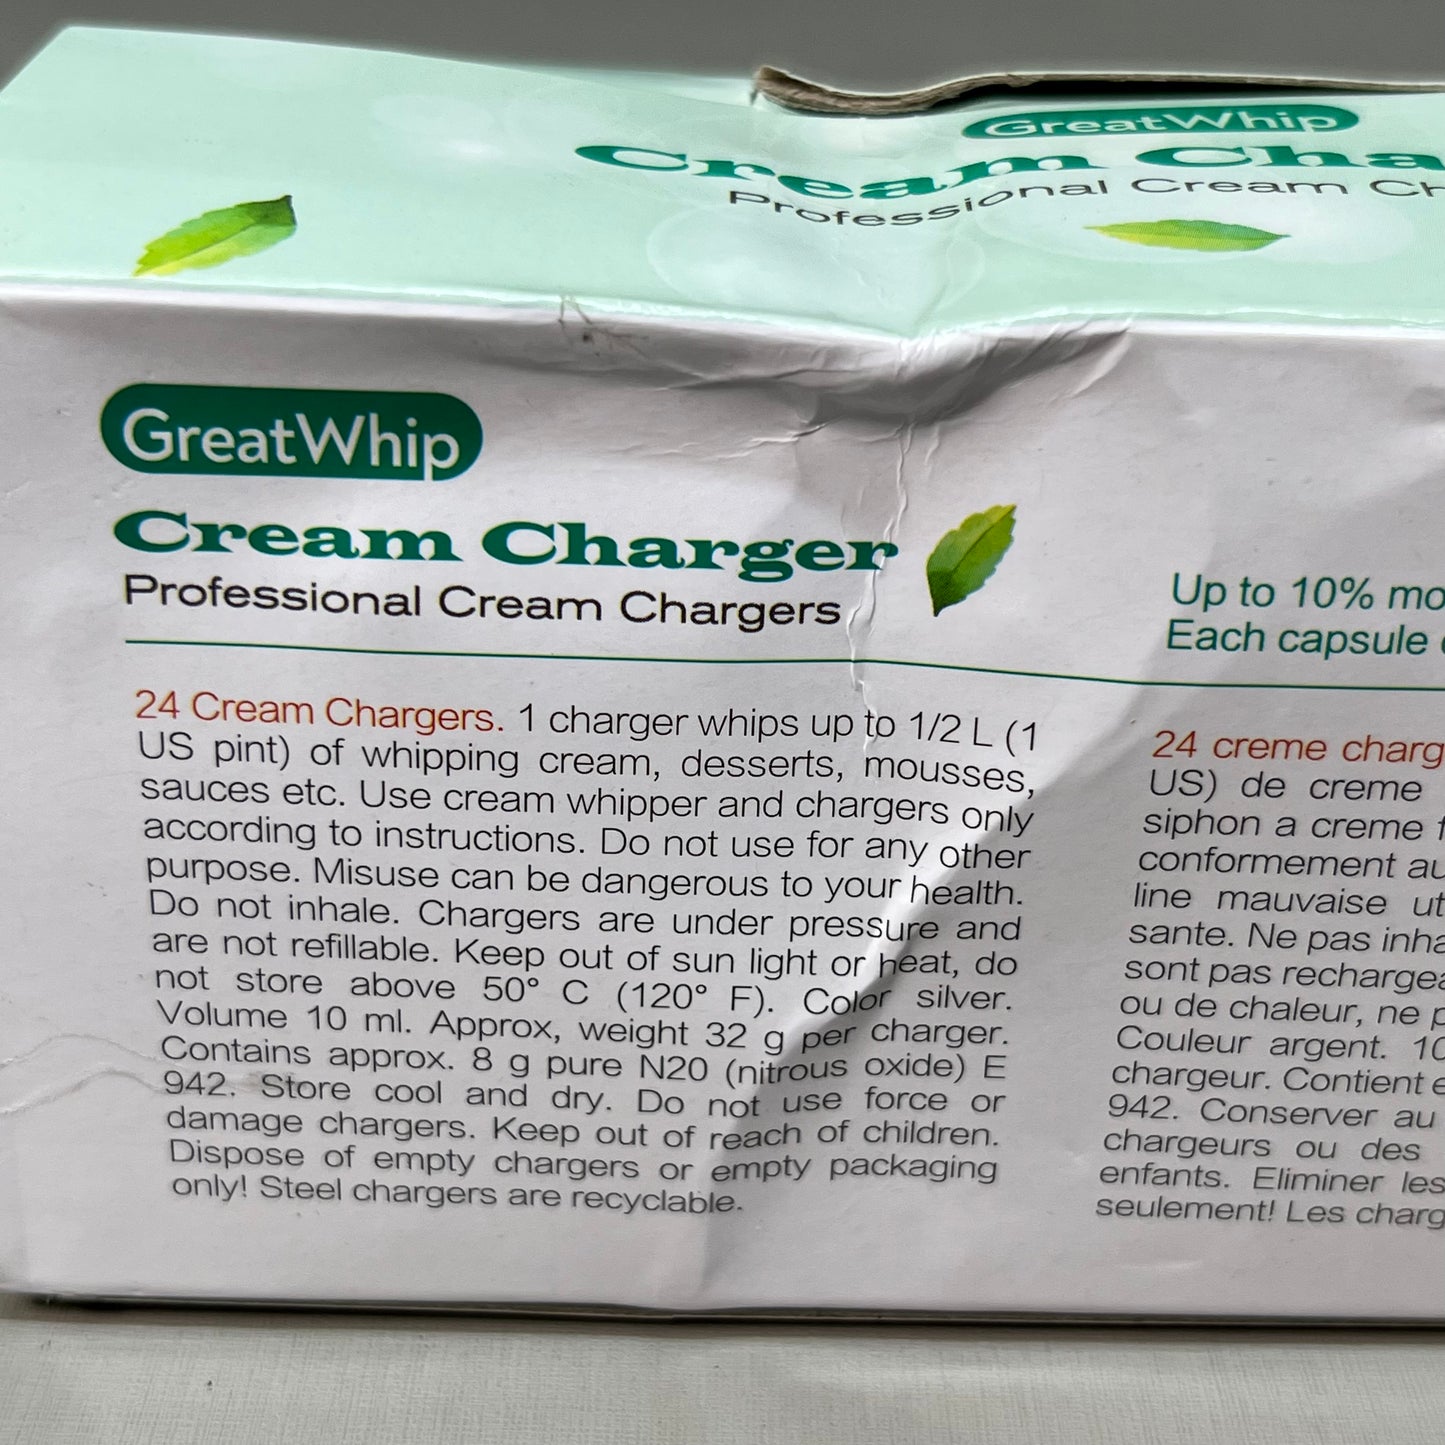 GREATWHIP Mint Cream Chargers 24 Pack Best By 03-28-2026 (New)